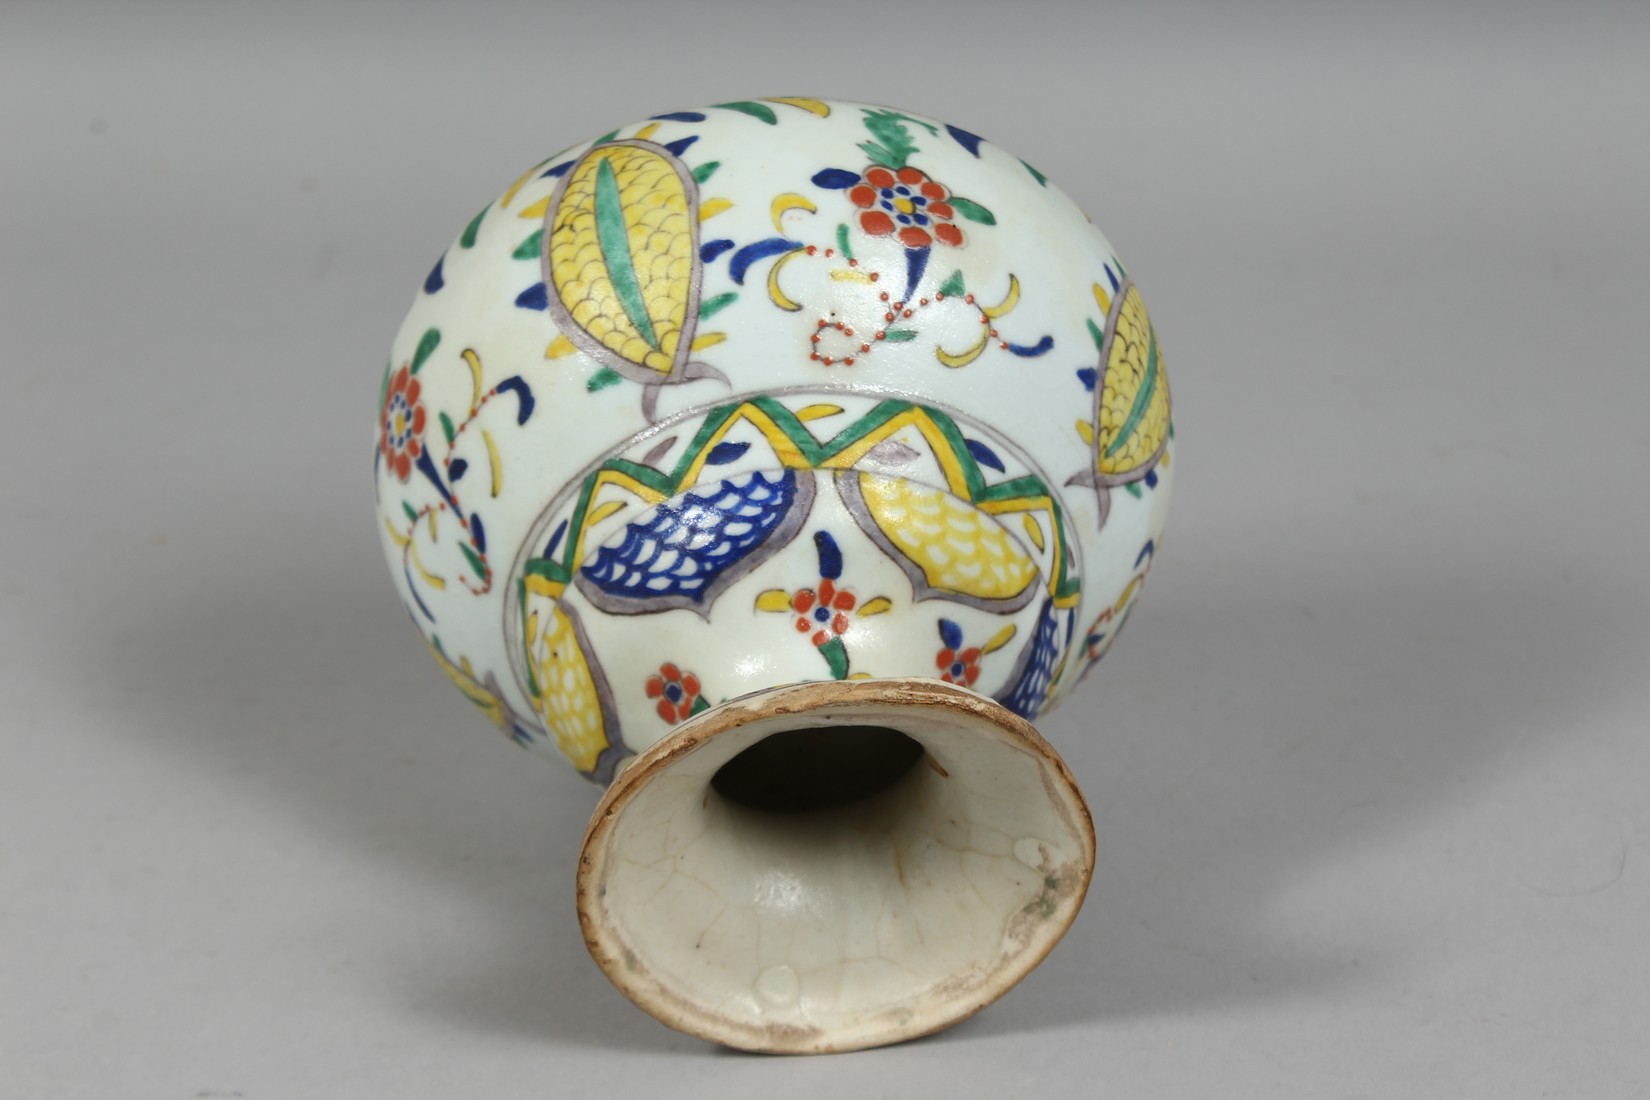 A TURKISH KUTAHYA POTTERY PEDESTAL SUGAR BOWL AND COVER, painted with various floral motifs, overall - Image 8 of 8